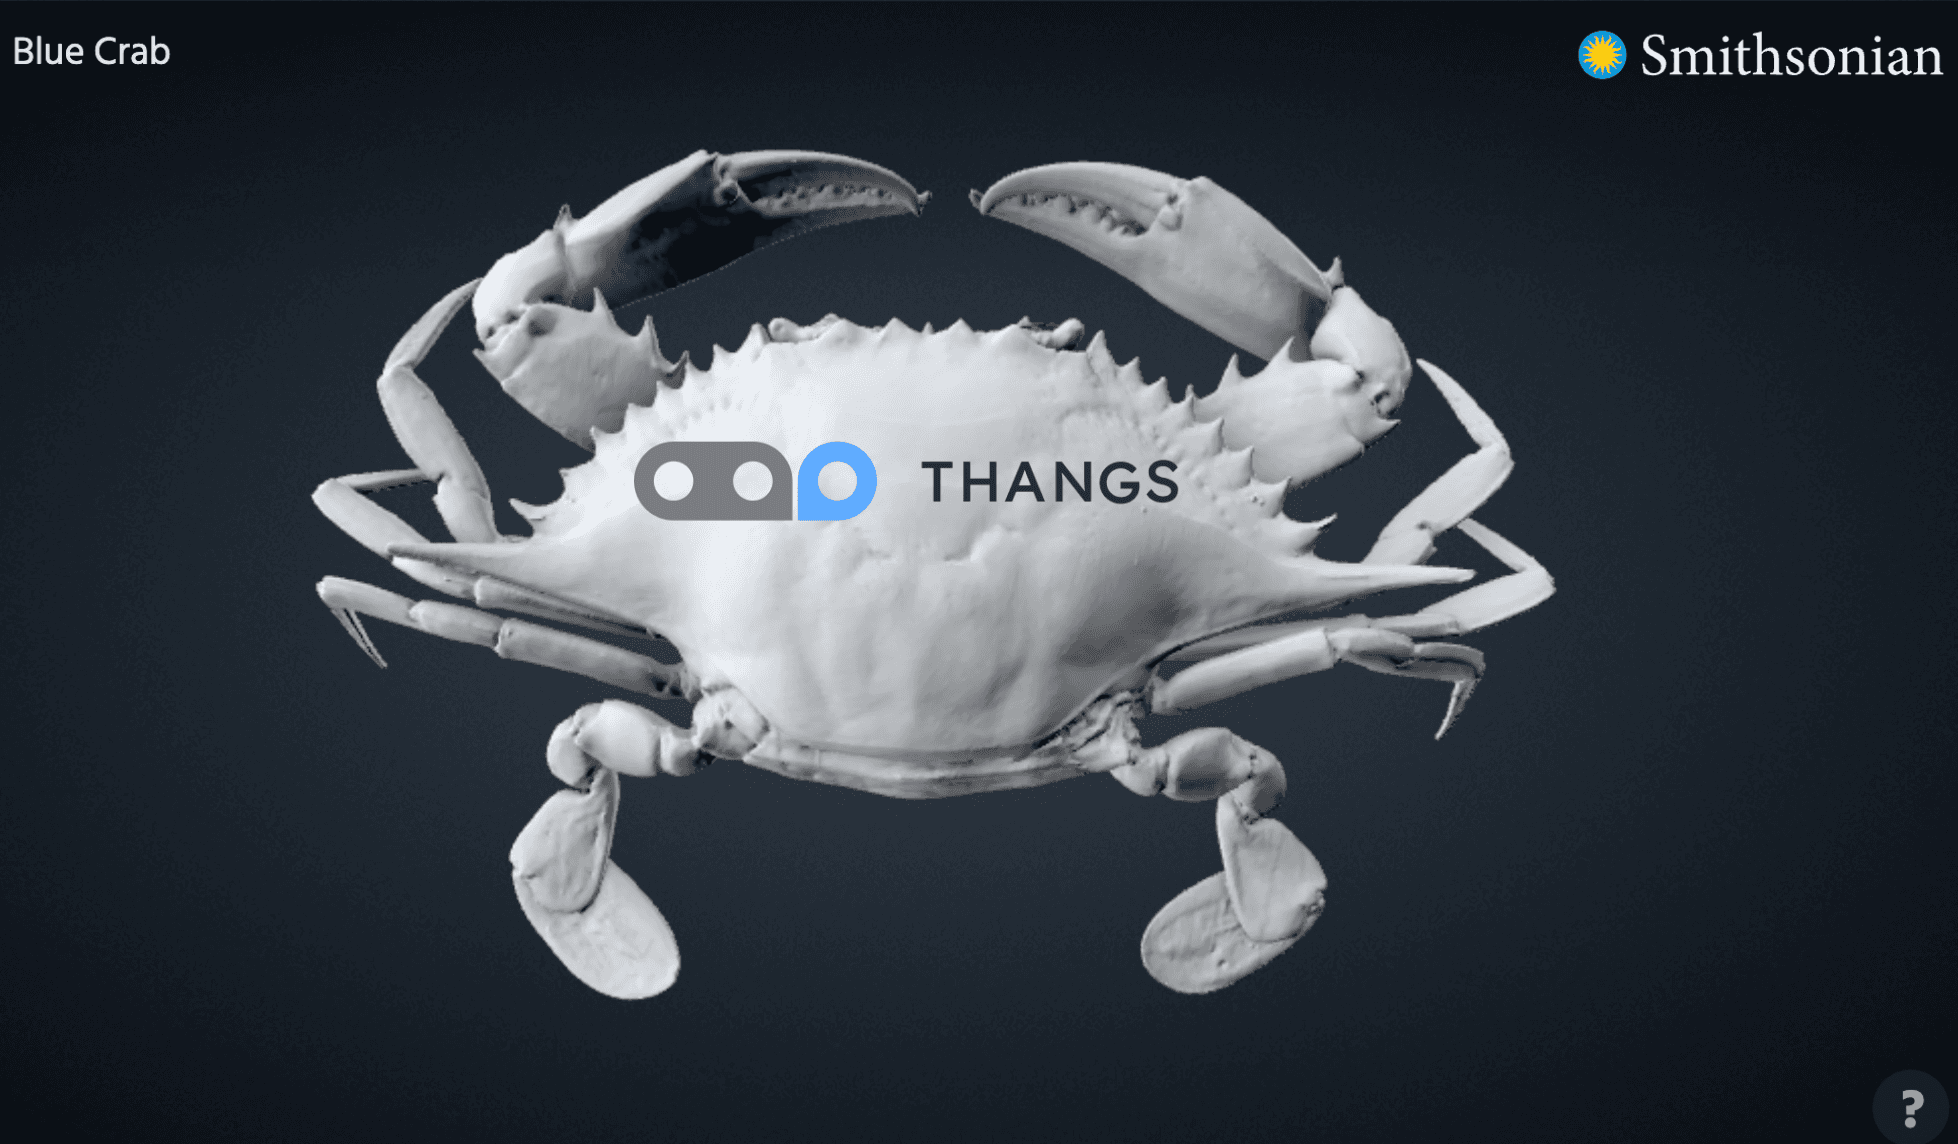 How to make your crab classy